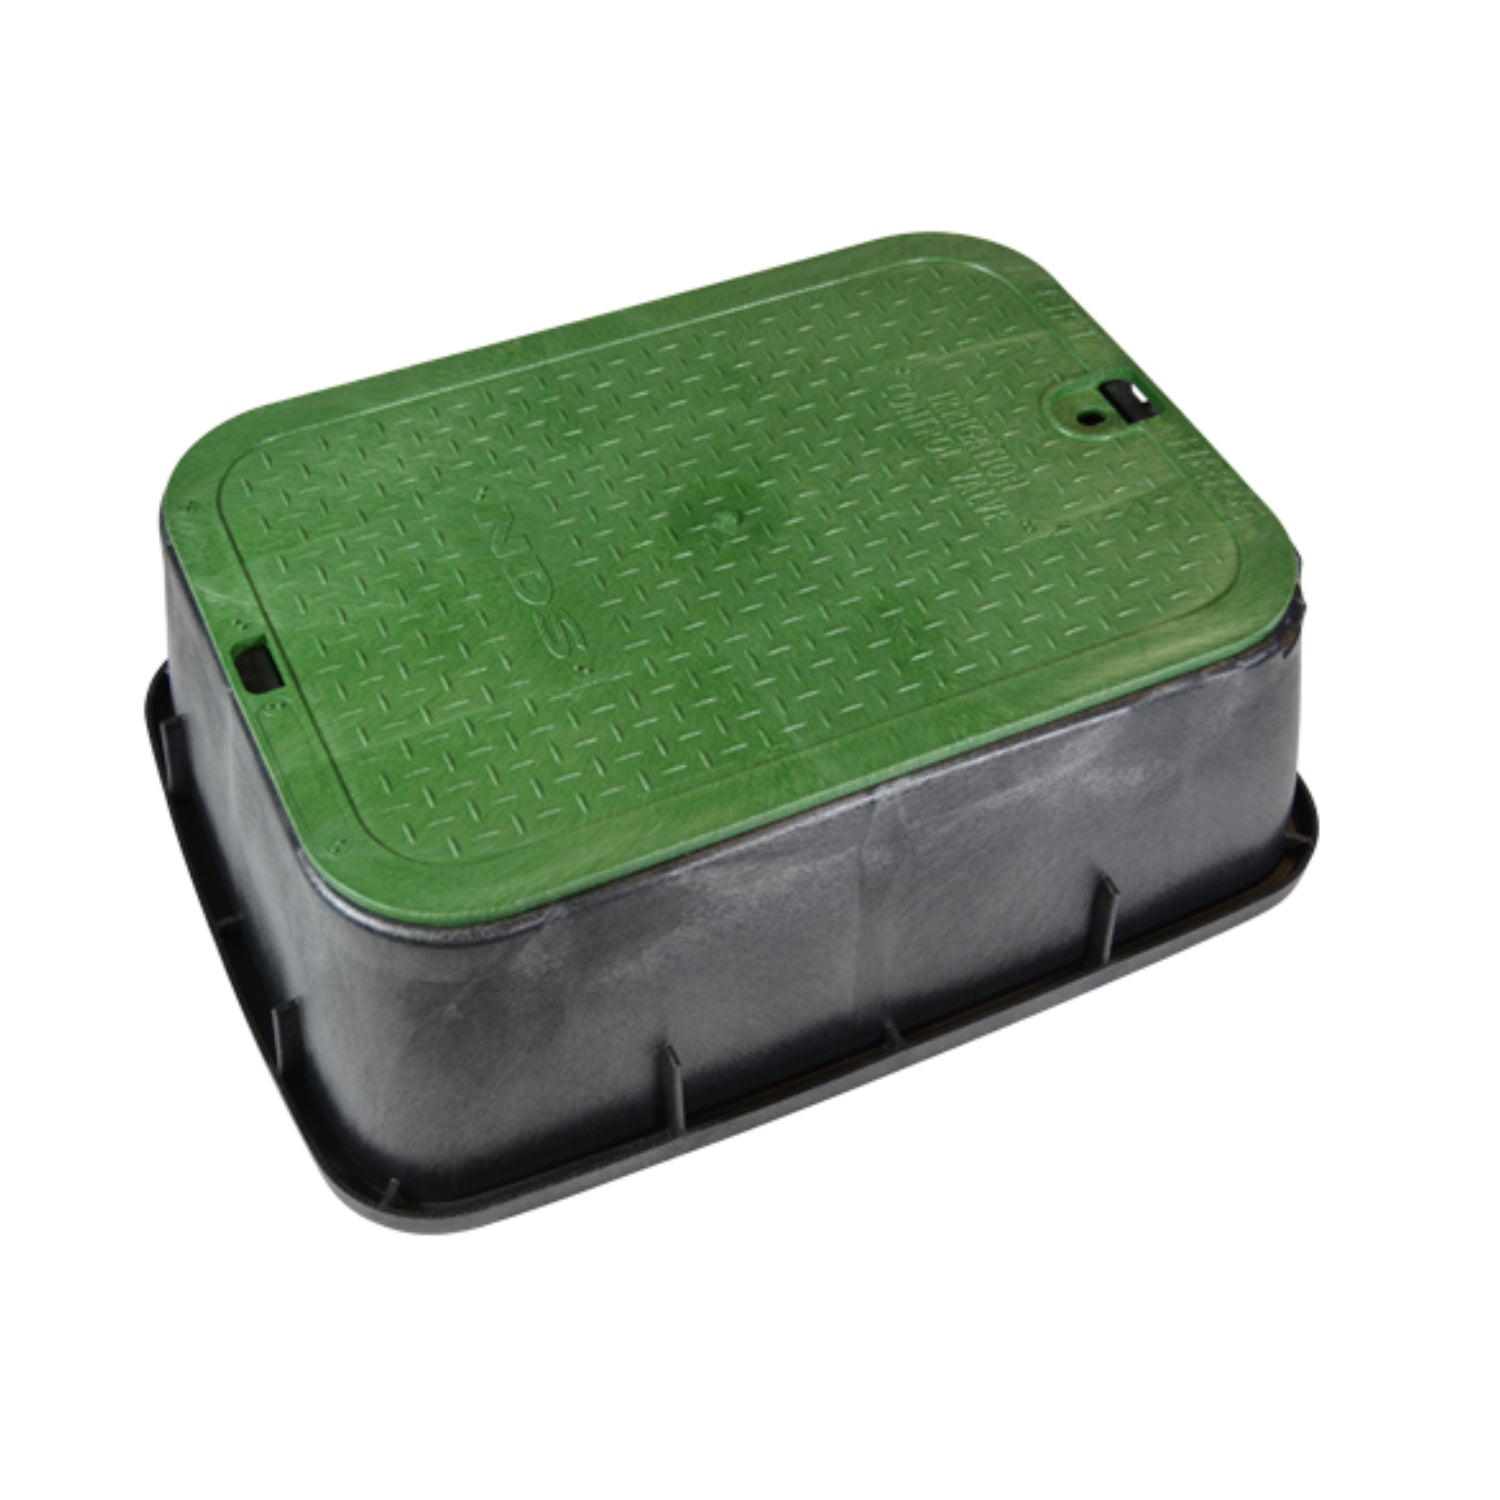 NDS - 119TBC - Standard 13"x20"x6" Box and Overlapping Lid, Green Lid/Black Body